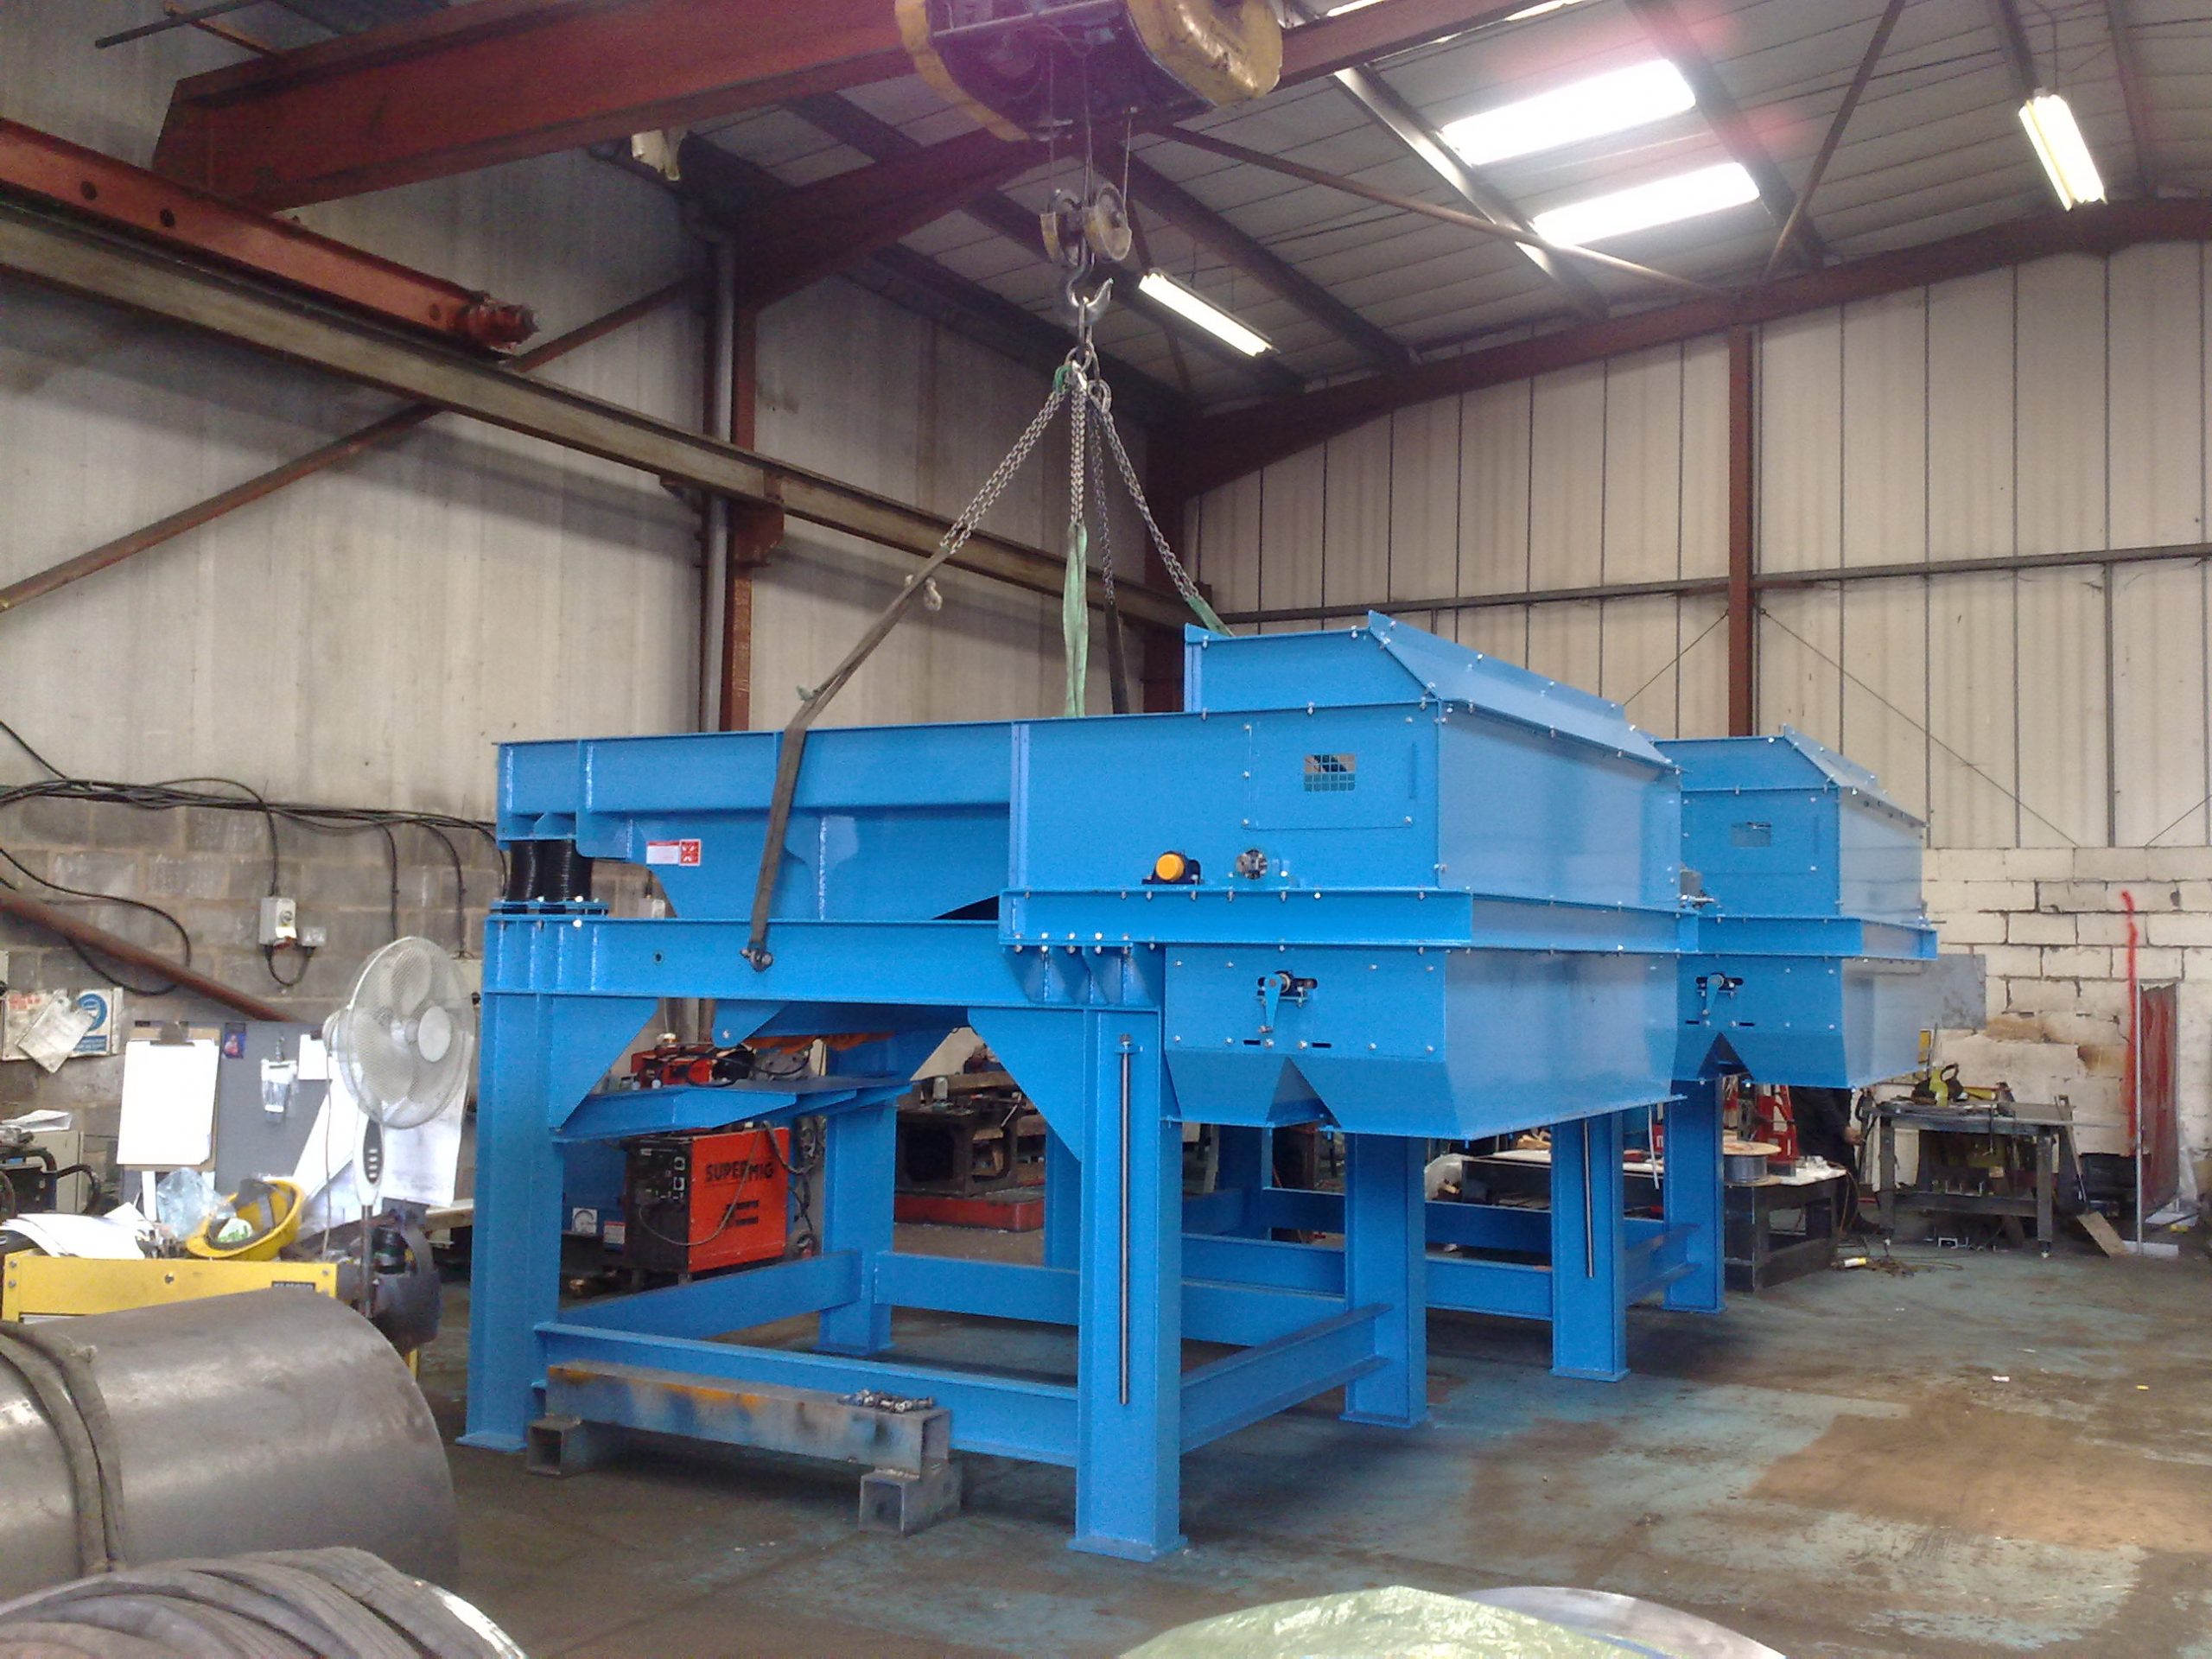 Vibratory feeders and drum magnets